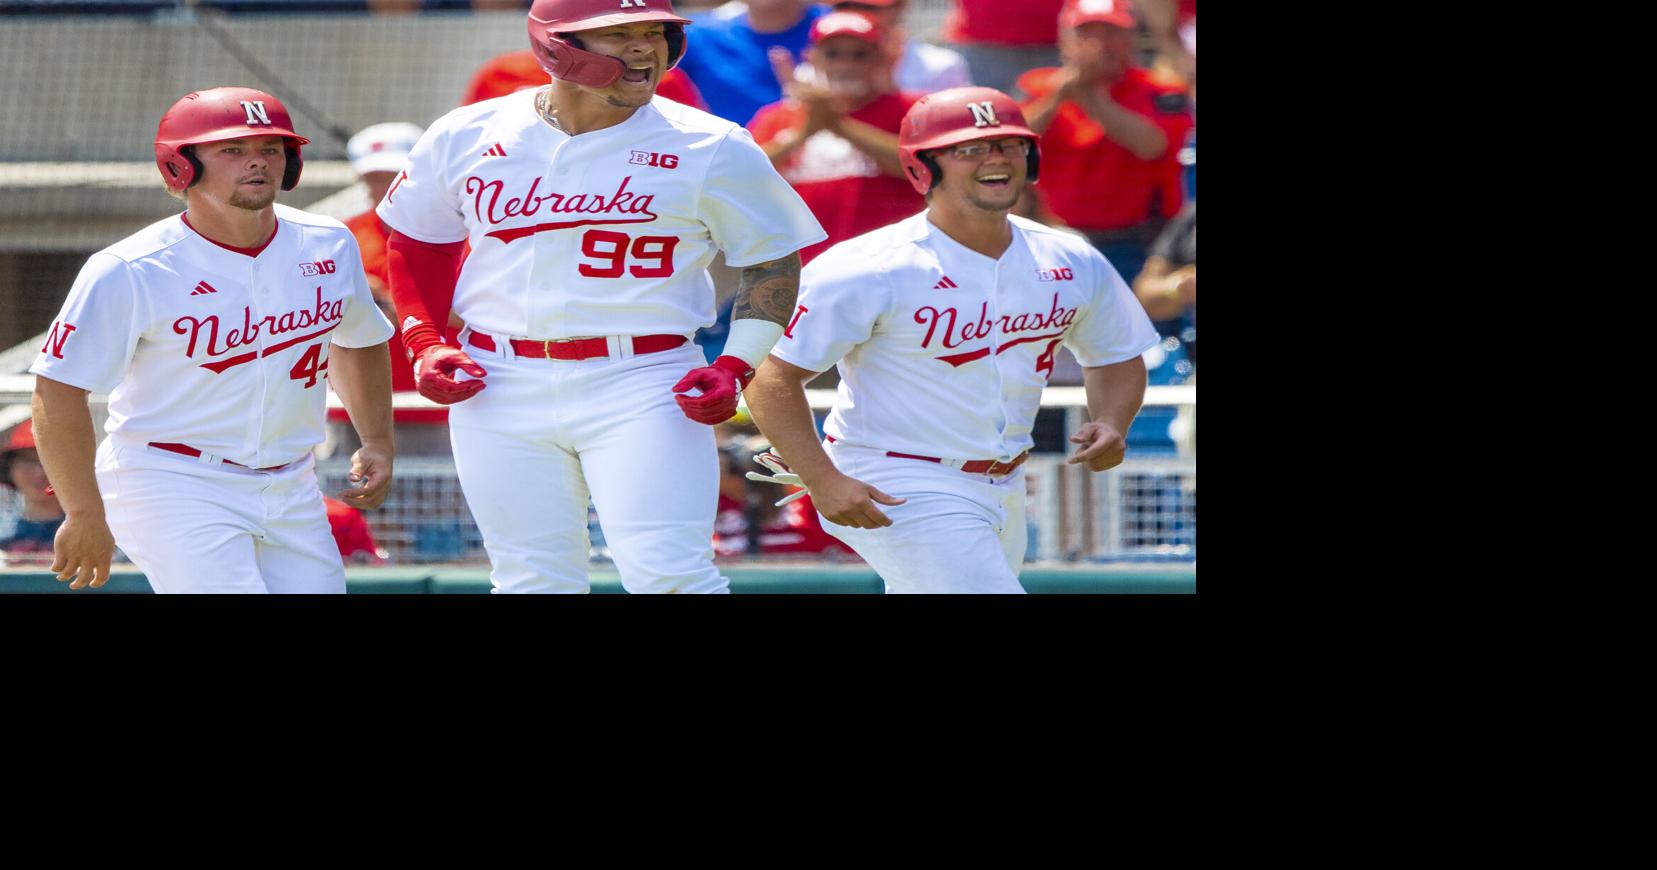 Nebraska uses 7th inning rally to defeat Rutgers in first round of Big